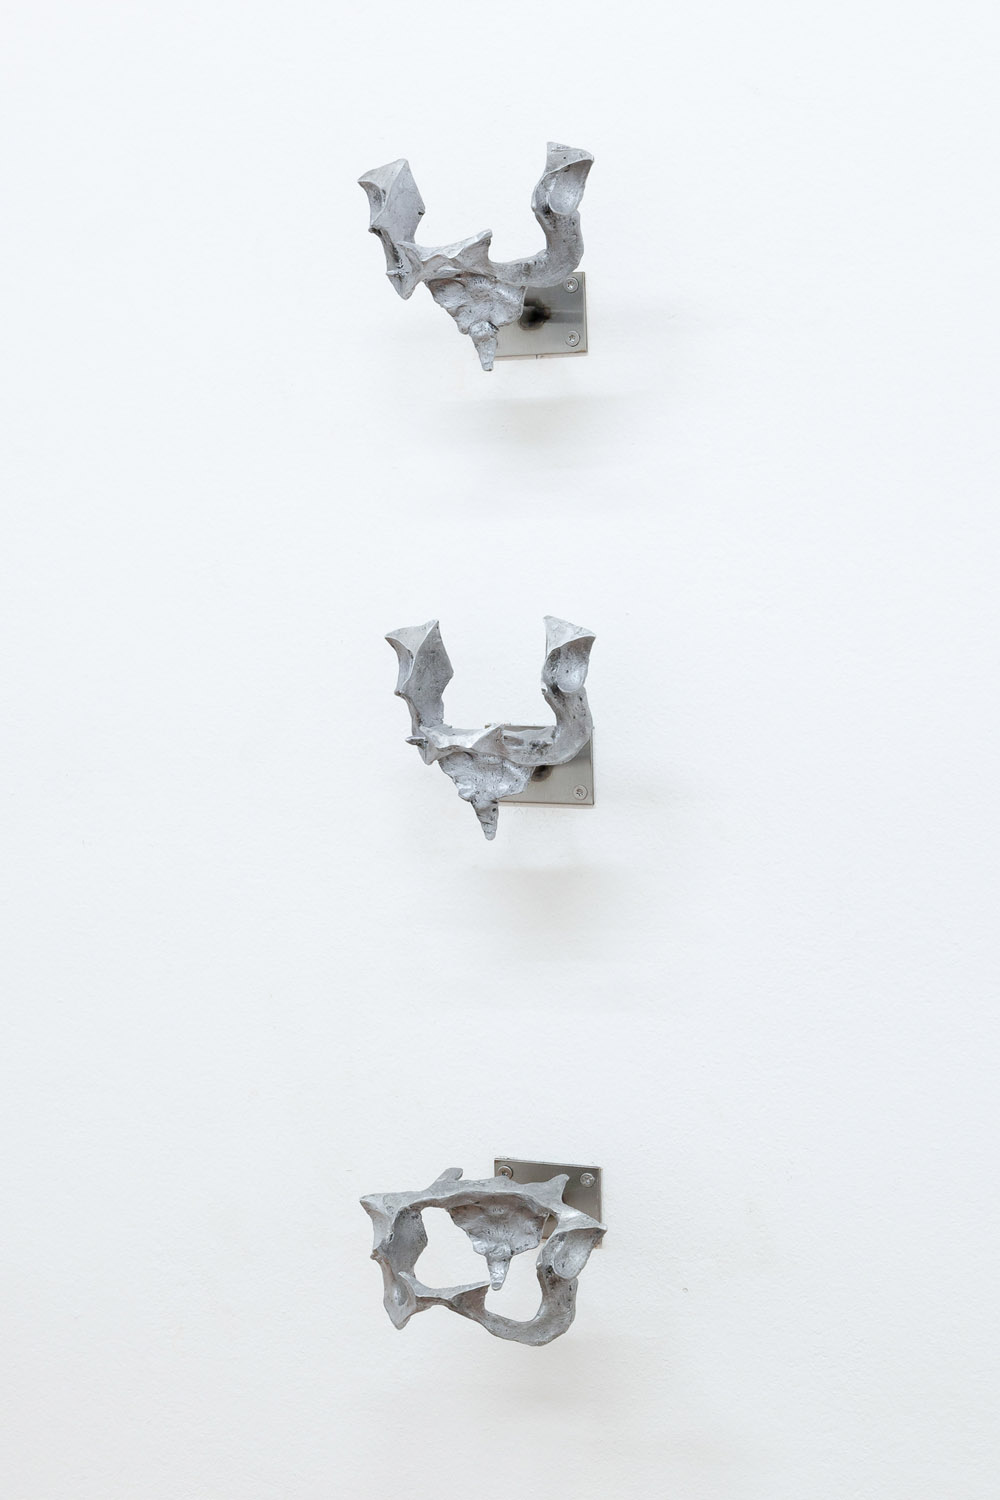 Ellie Hunter, Khora I – III, 2021. Cast aluminum and stainless steel. Exhibition view, Loggia. Photo: Flavio Palasciano.